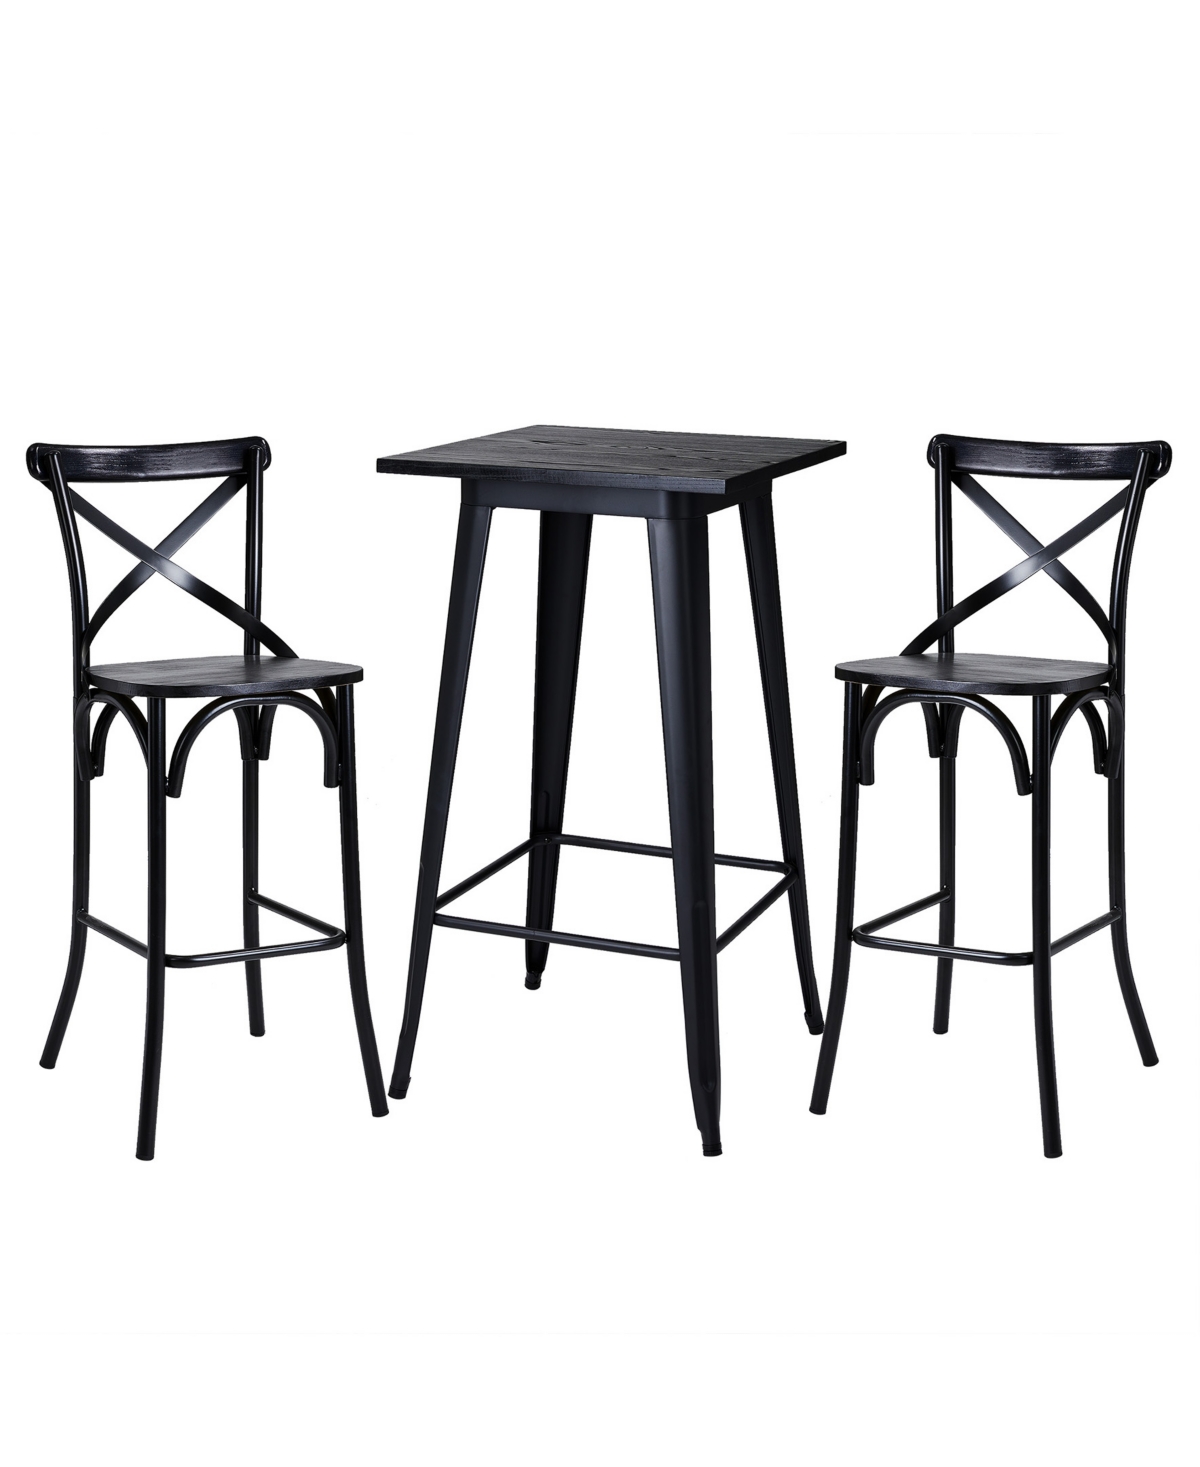 Glitzhome Pub Table And Bar Chair Set, 3 Pieces In Black